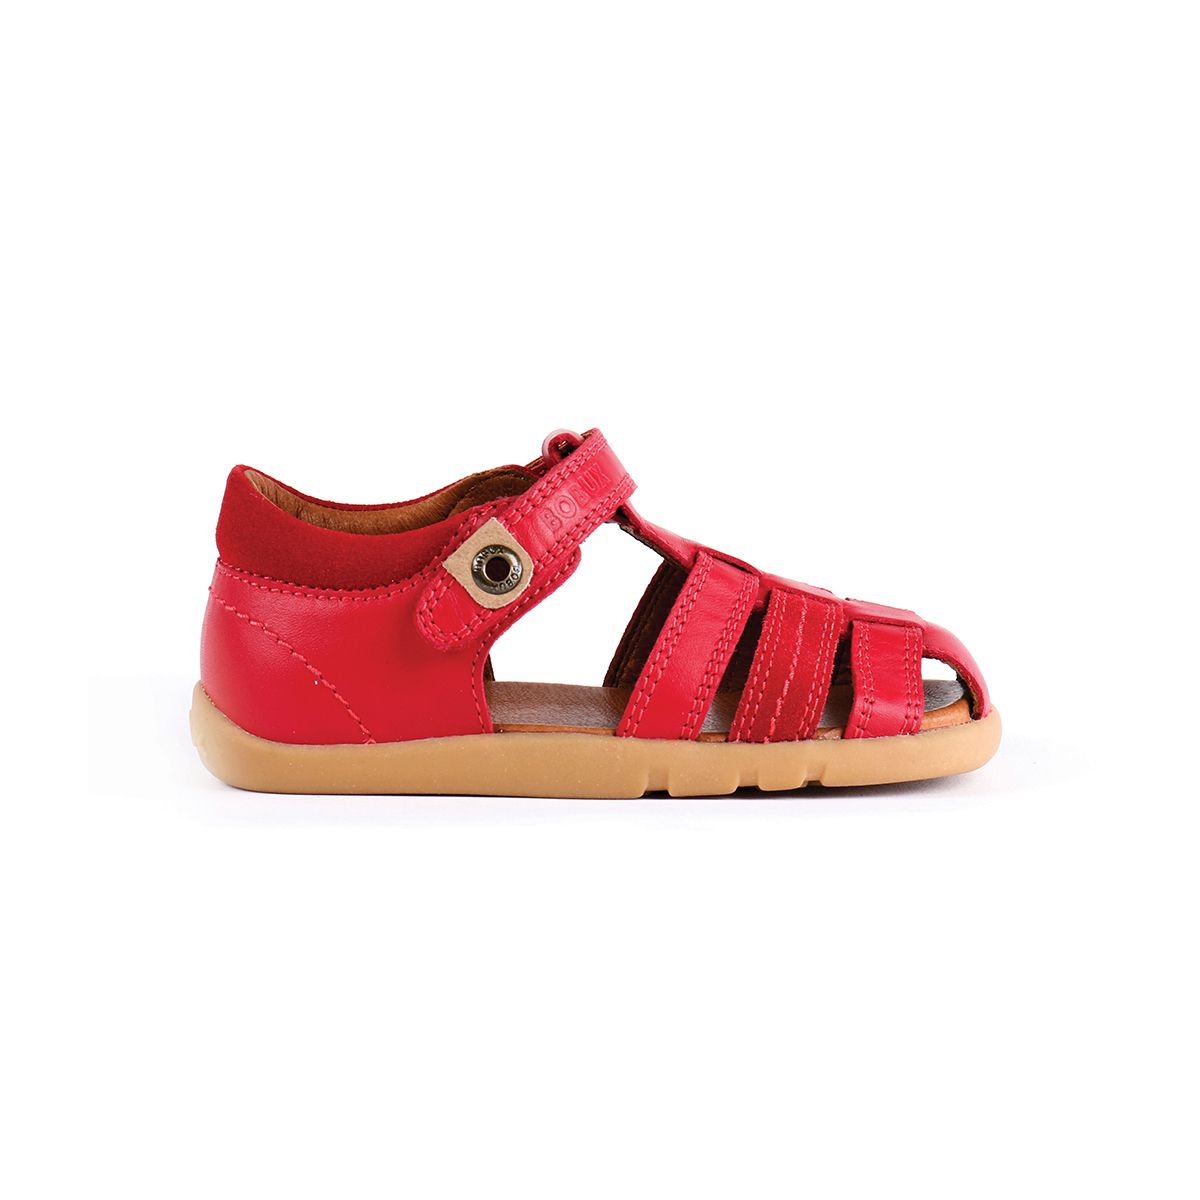 A boys closed toe sandal by Bobux,style Roam,in red with velcro fastening. Right side view.